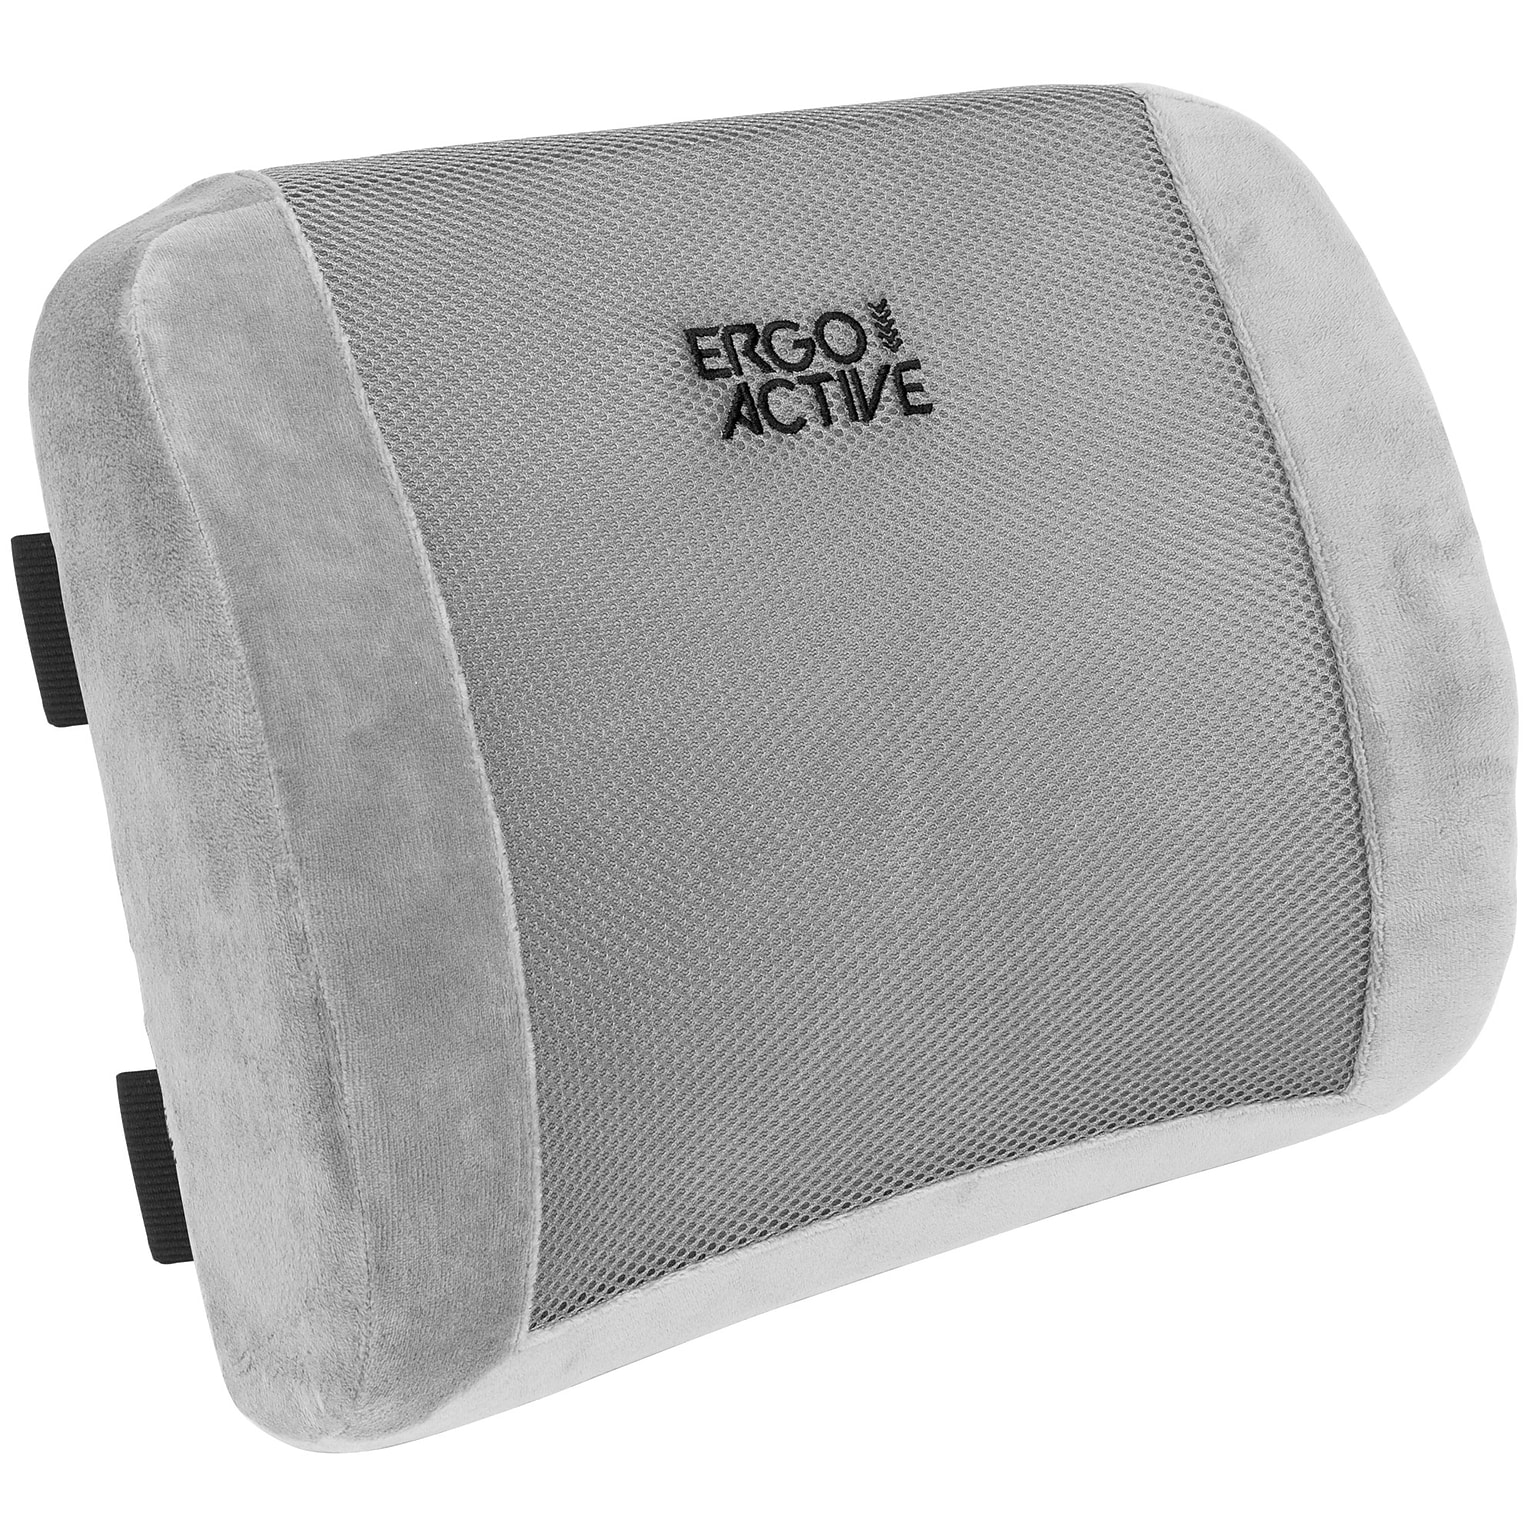 Mount-It! ErgoActive Lumbar Support Cushion with Straps, Breathable Mesh Cover, Gray (MI-1013)